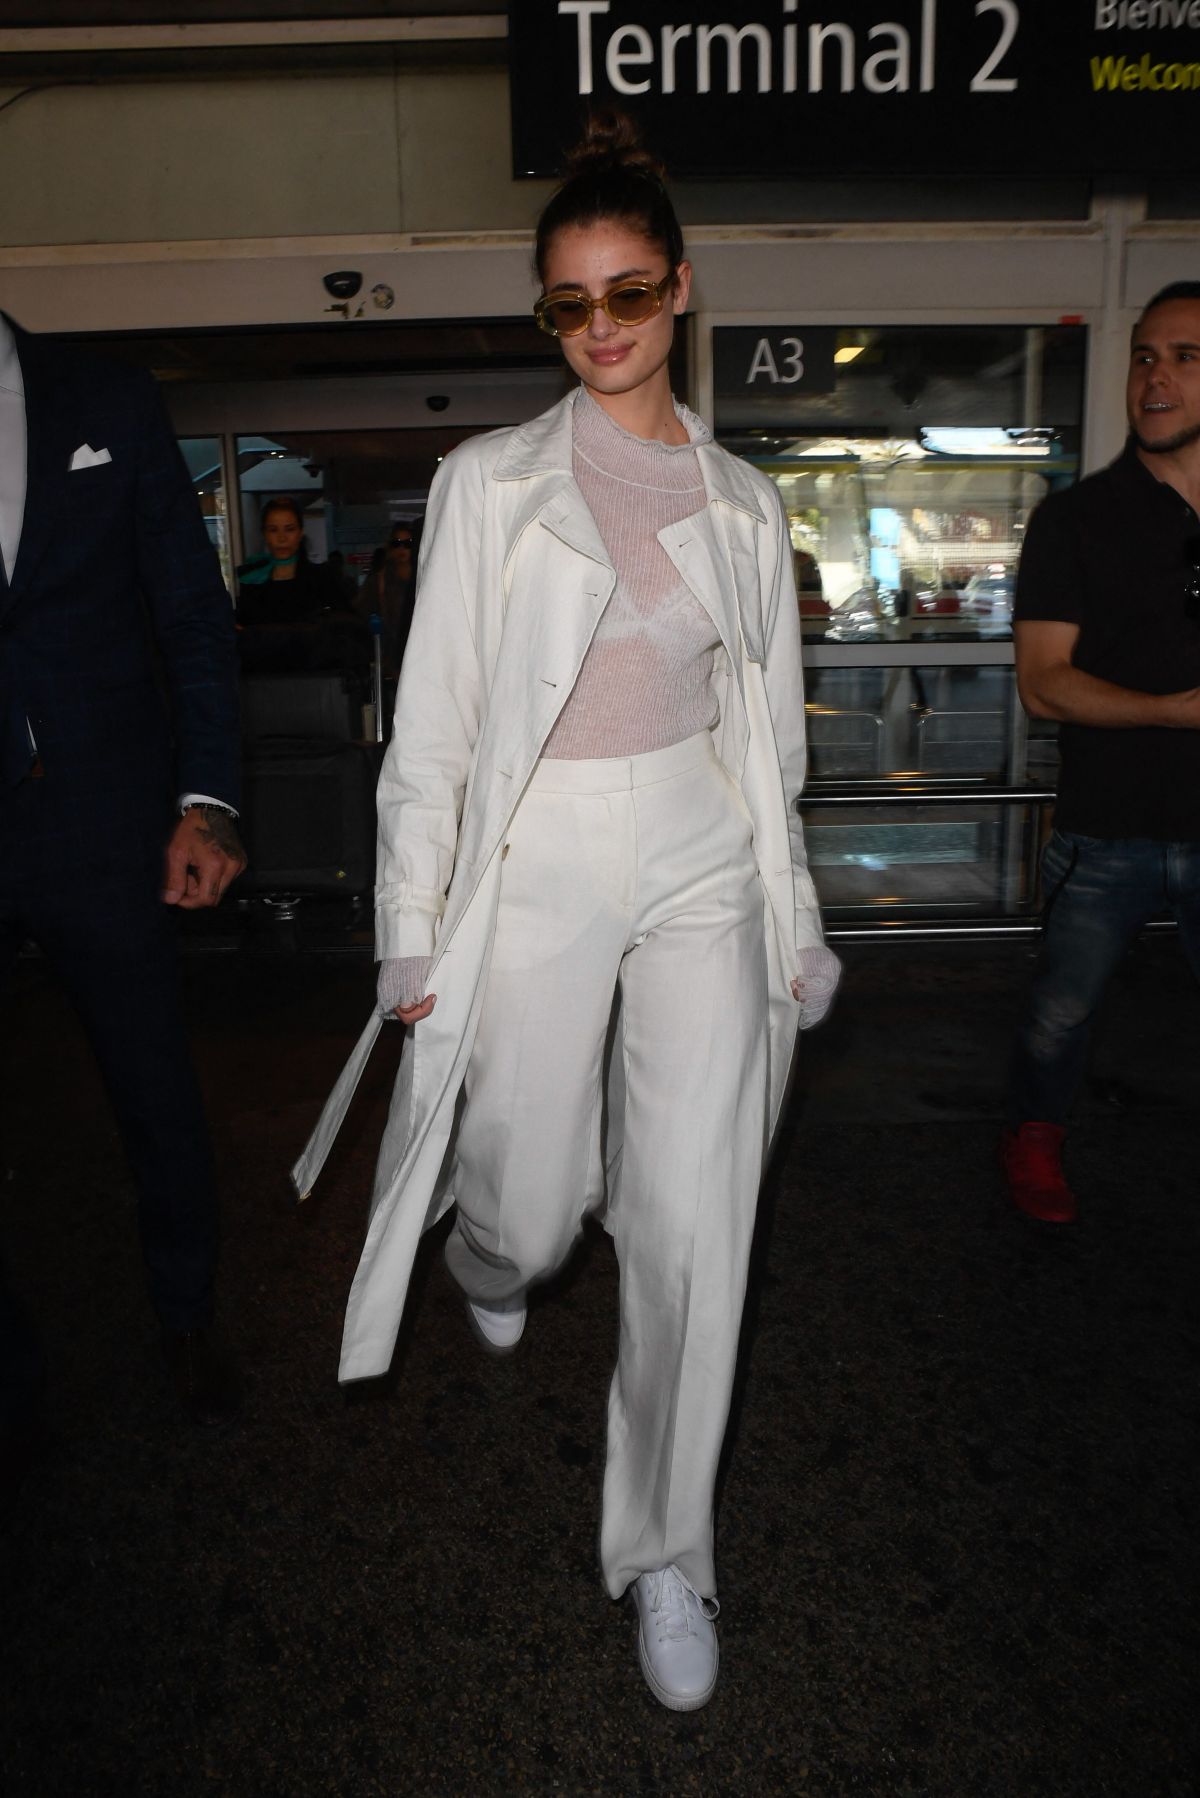 taylor-hill-arrives-at-nice-airport-05-16-2019-1.jpg